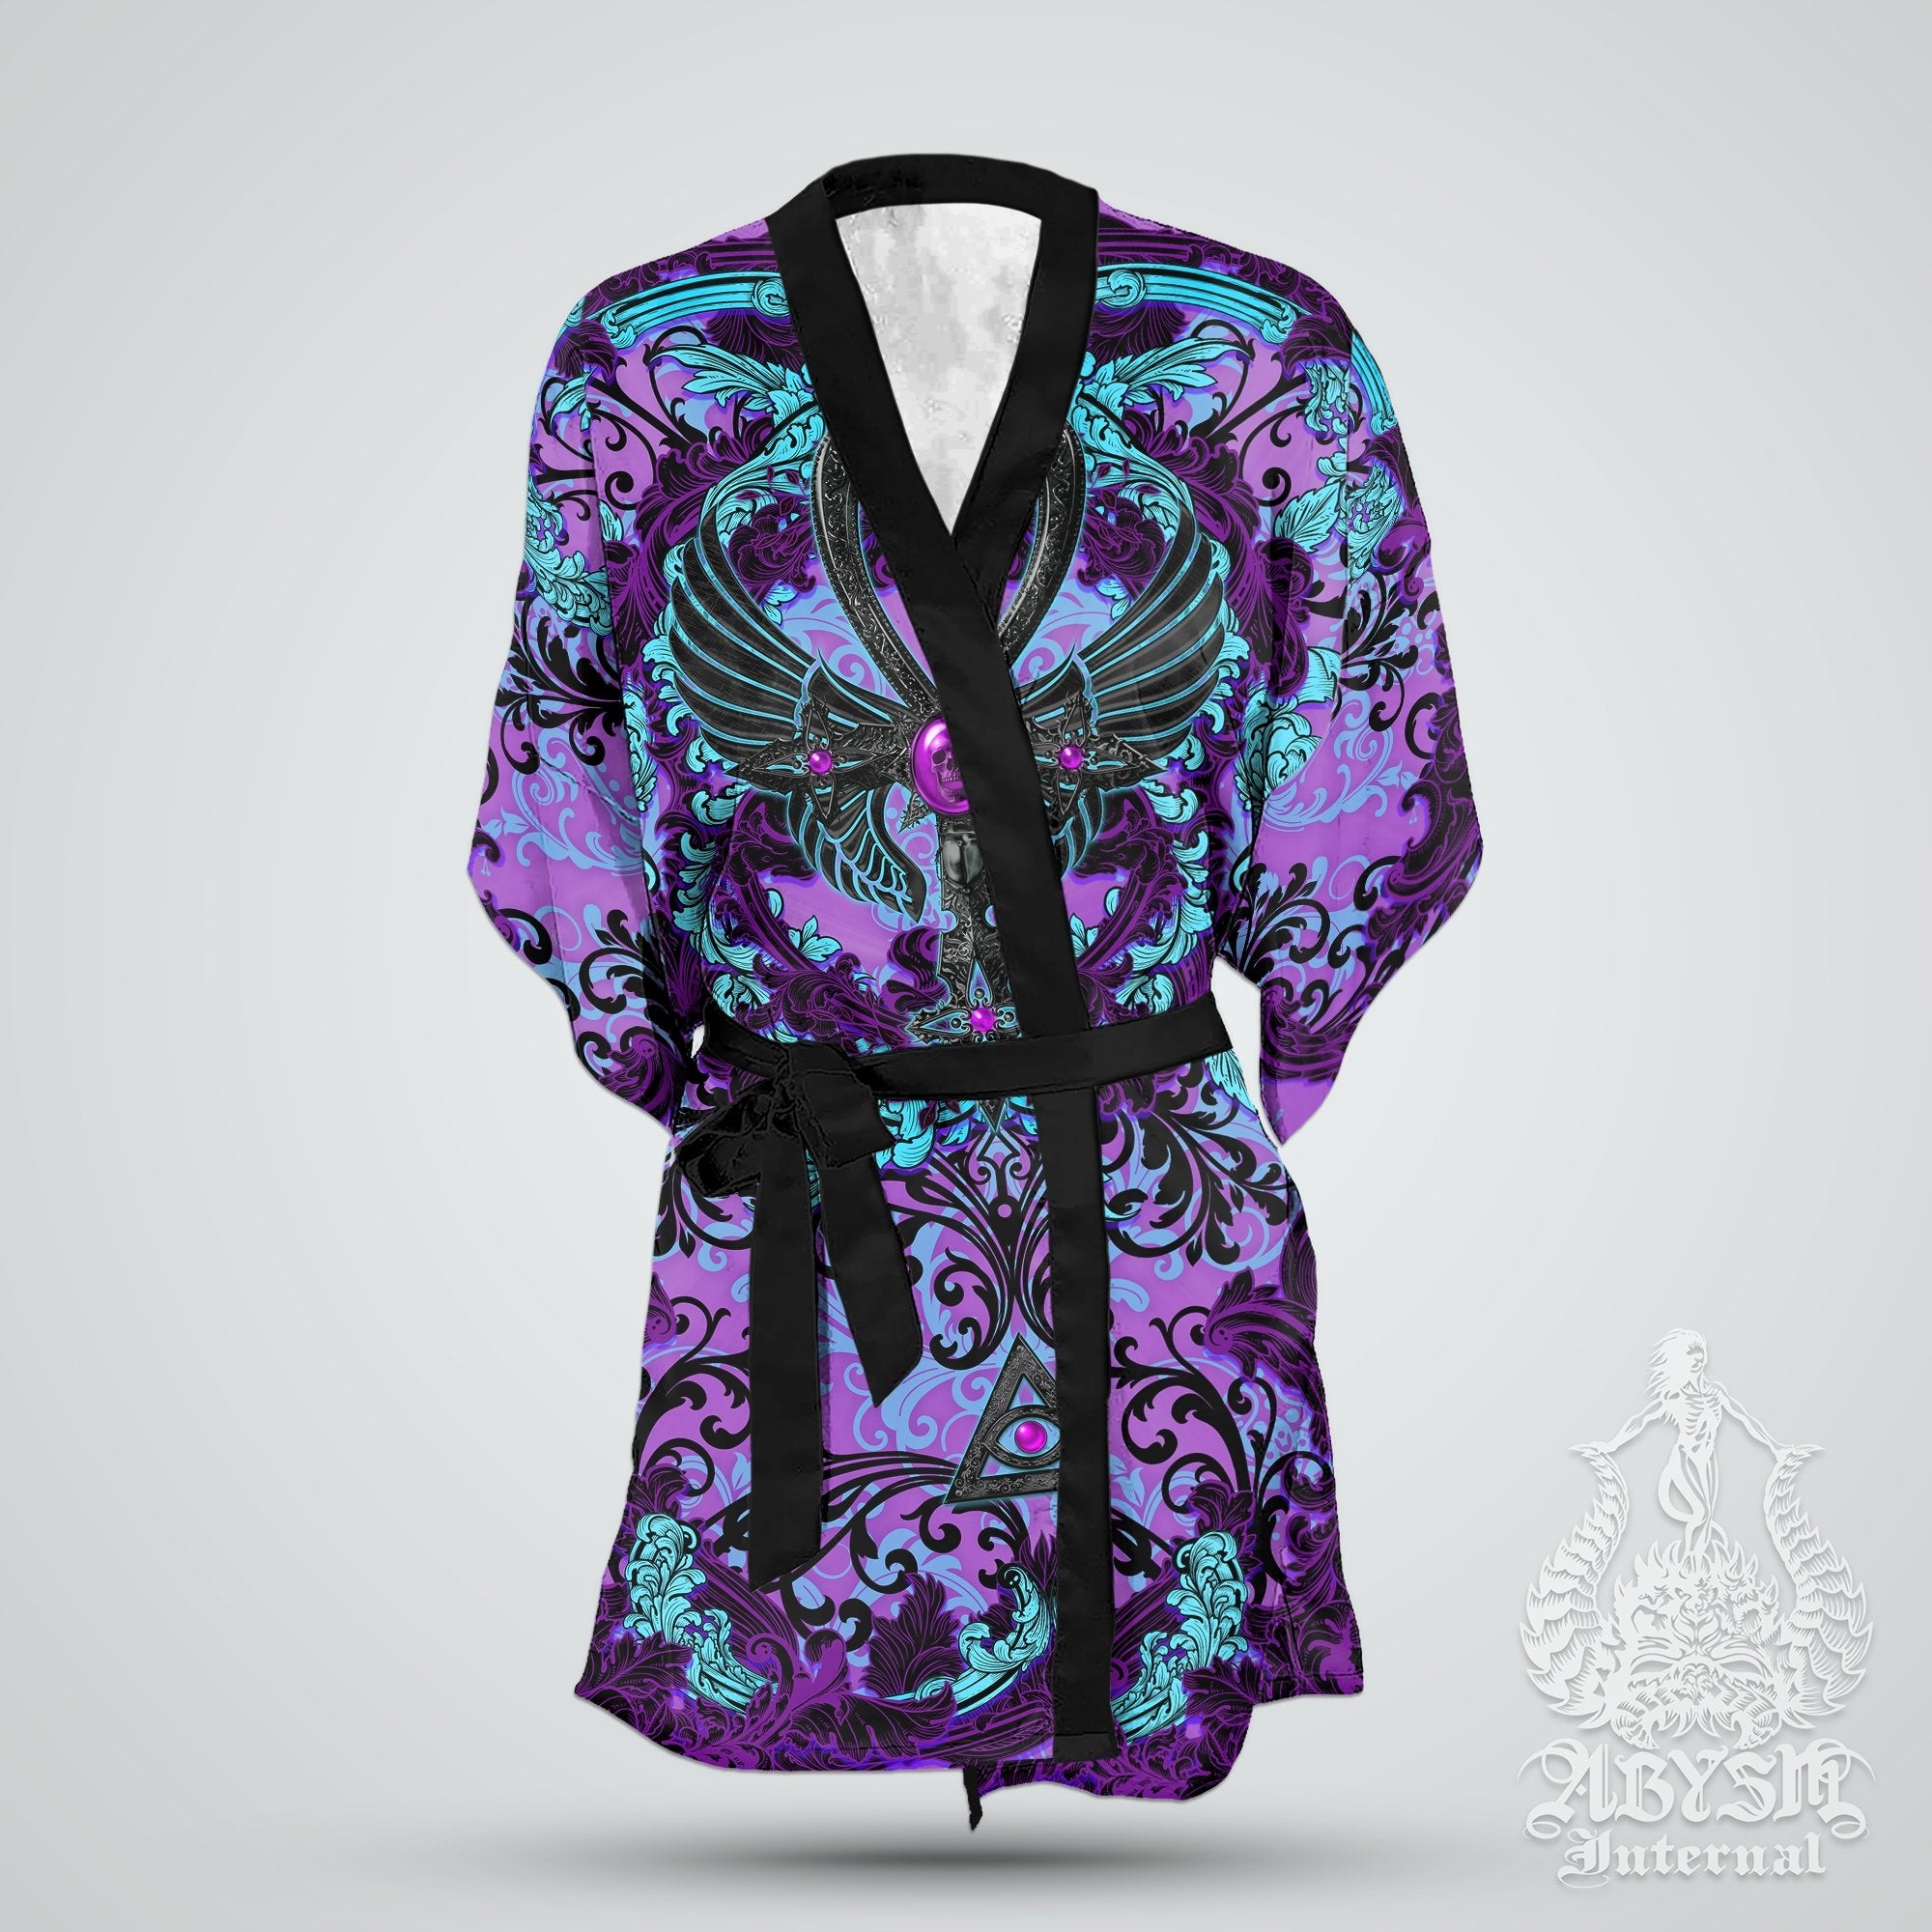 Pastel Goth Cover Up, Beach Outfit, Party Kimono, Gothic Summer Festival Robe, Indie and Alternative Clothing, Unisex - Ankh, Black Purple - Abysm Internal